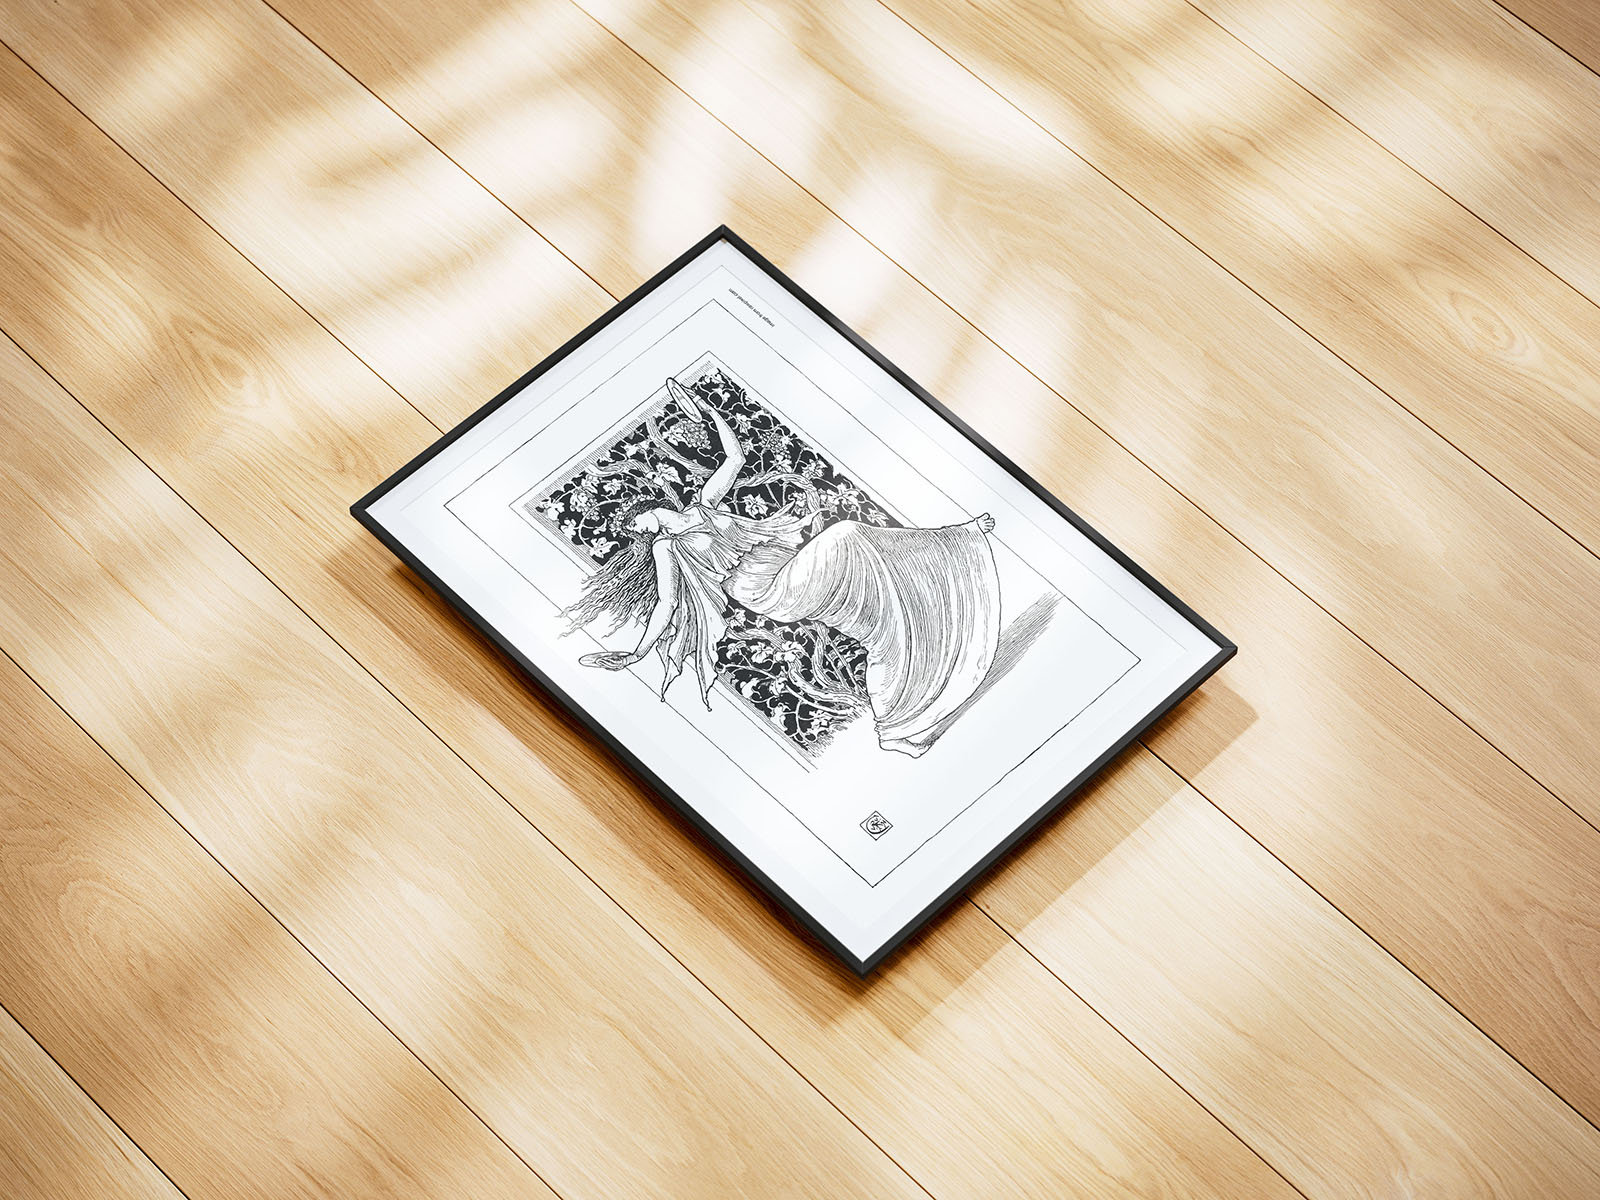 Poster Frame Mockup on the Floor in 5 Sights FREE PSD